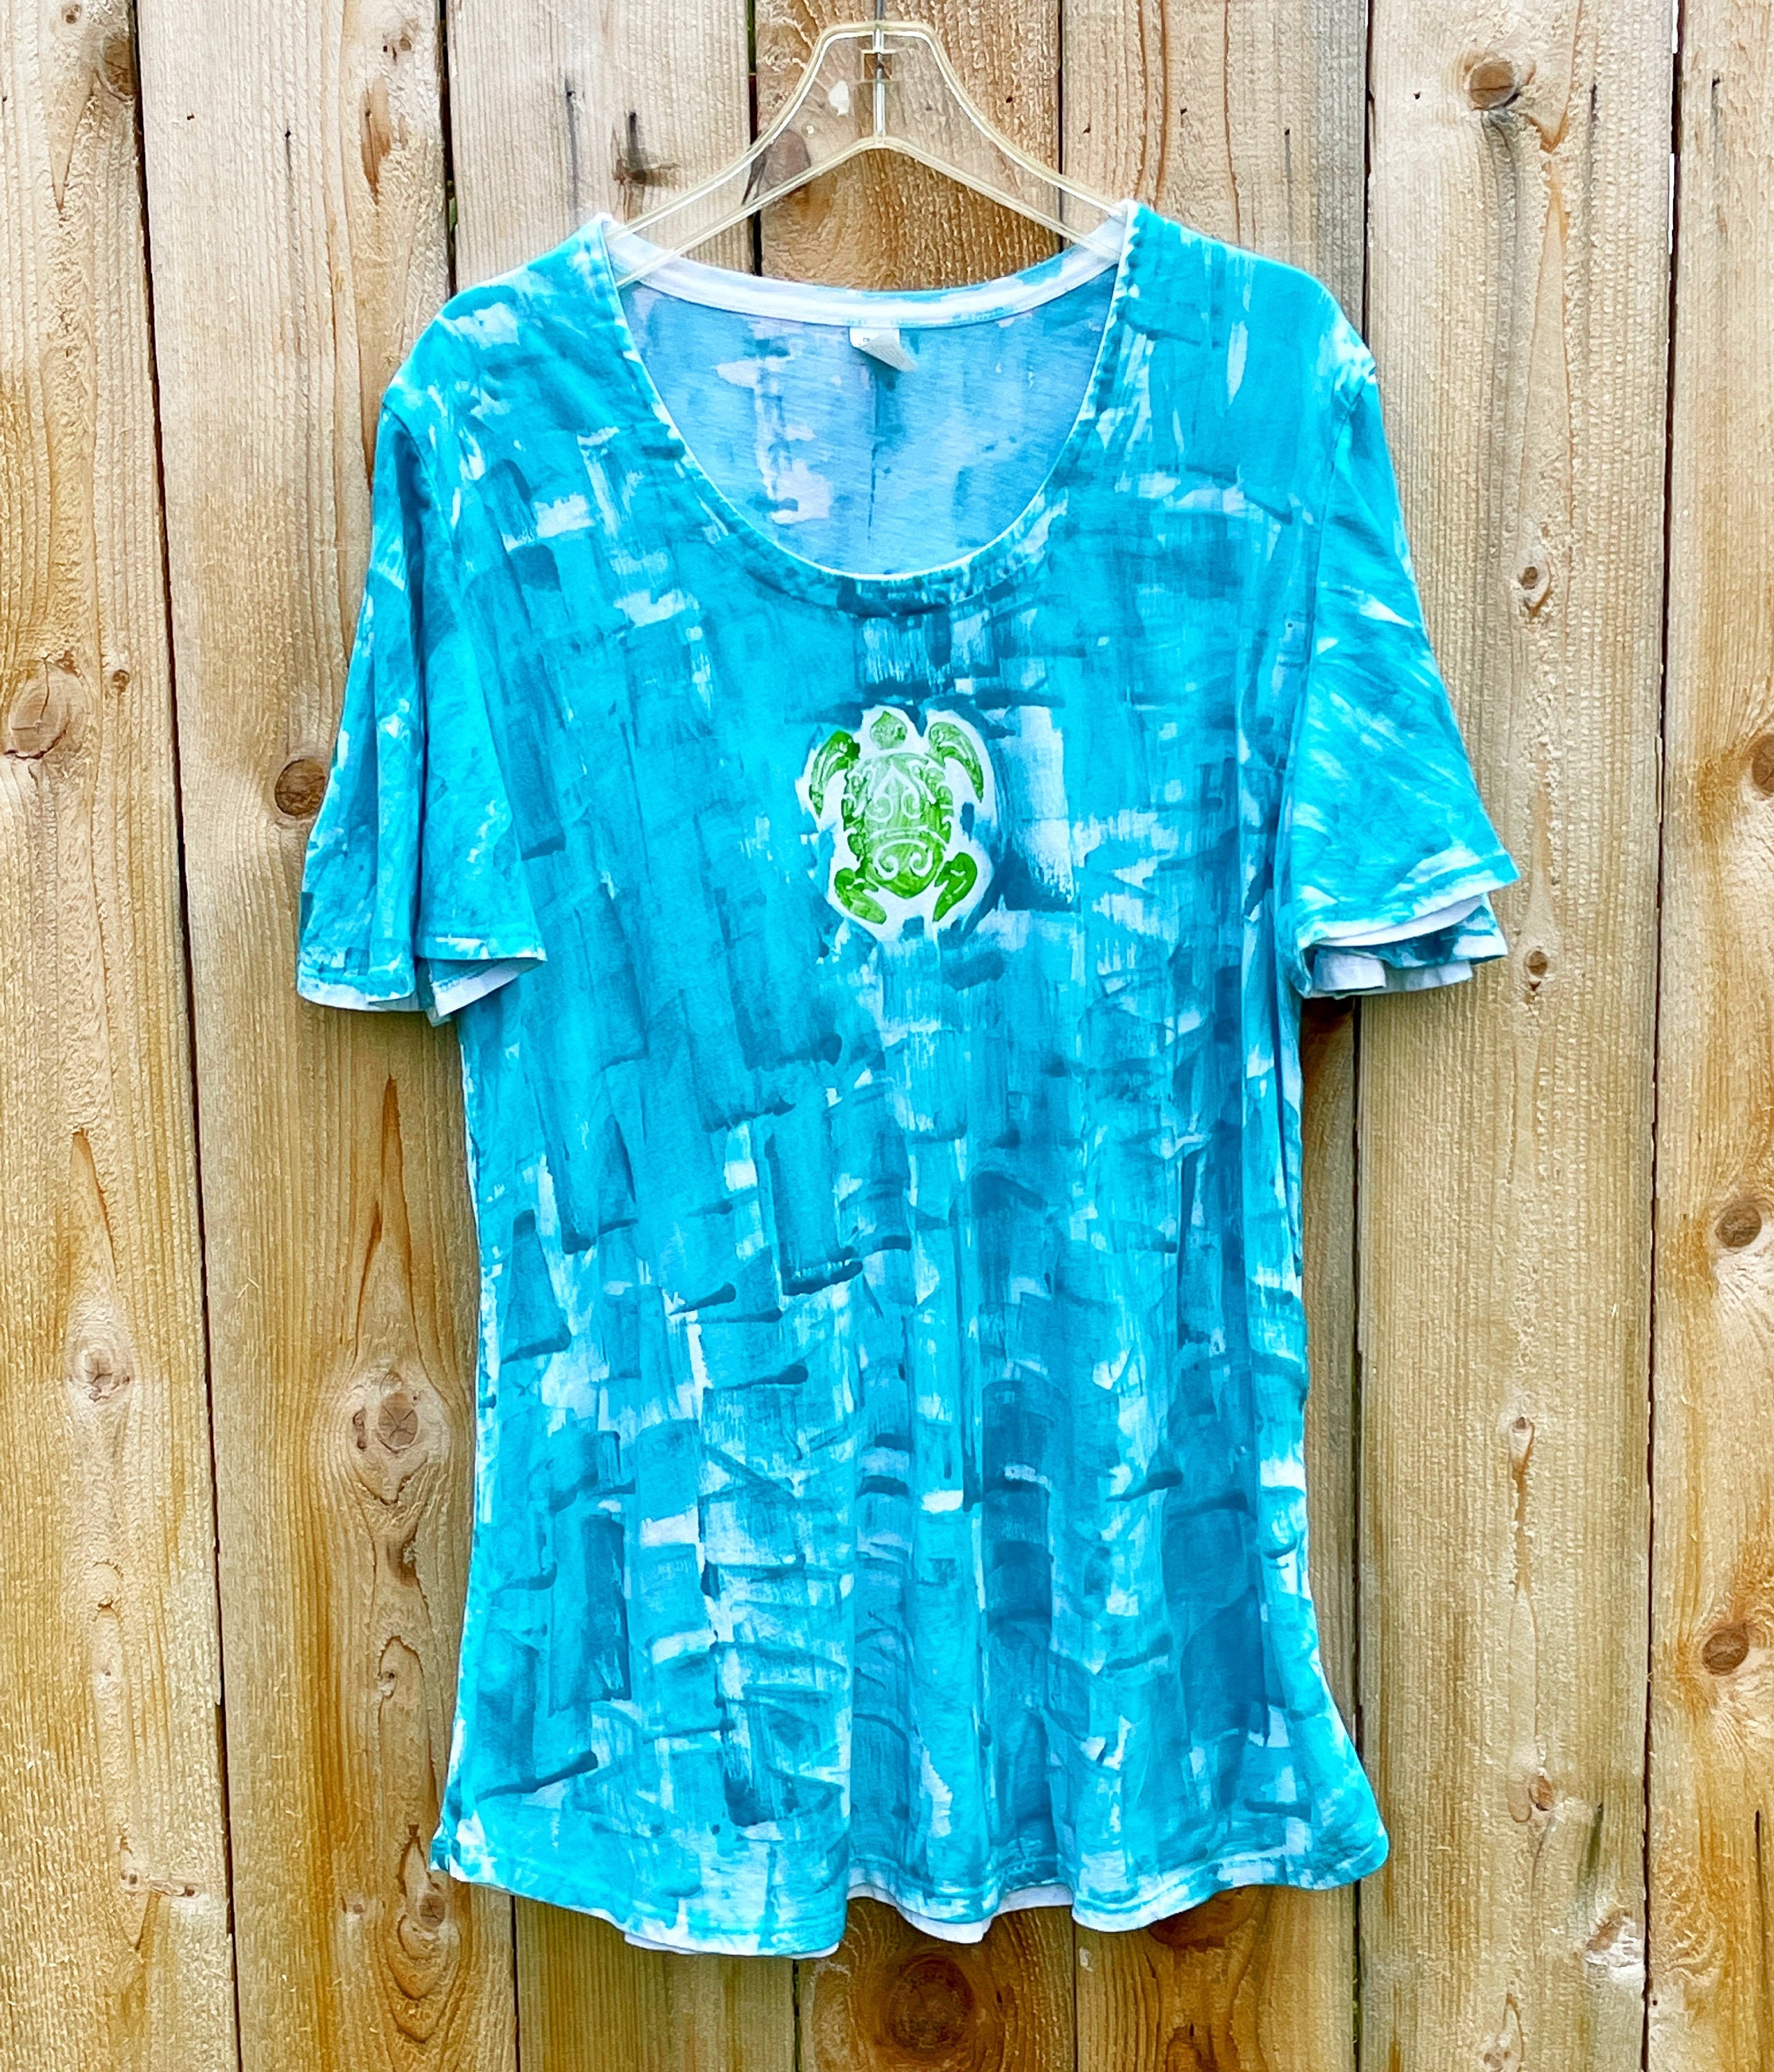 Hand Painted T-Shirt Cotton Tunic Top Petite to Plus Size | Etsy